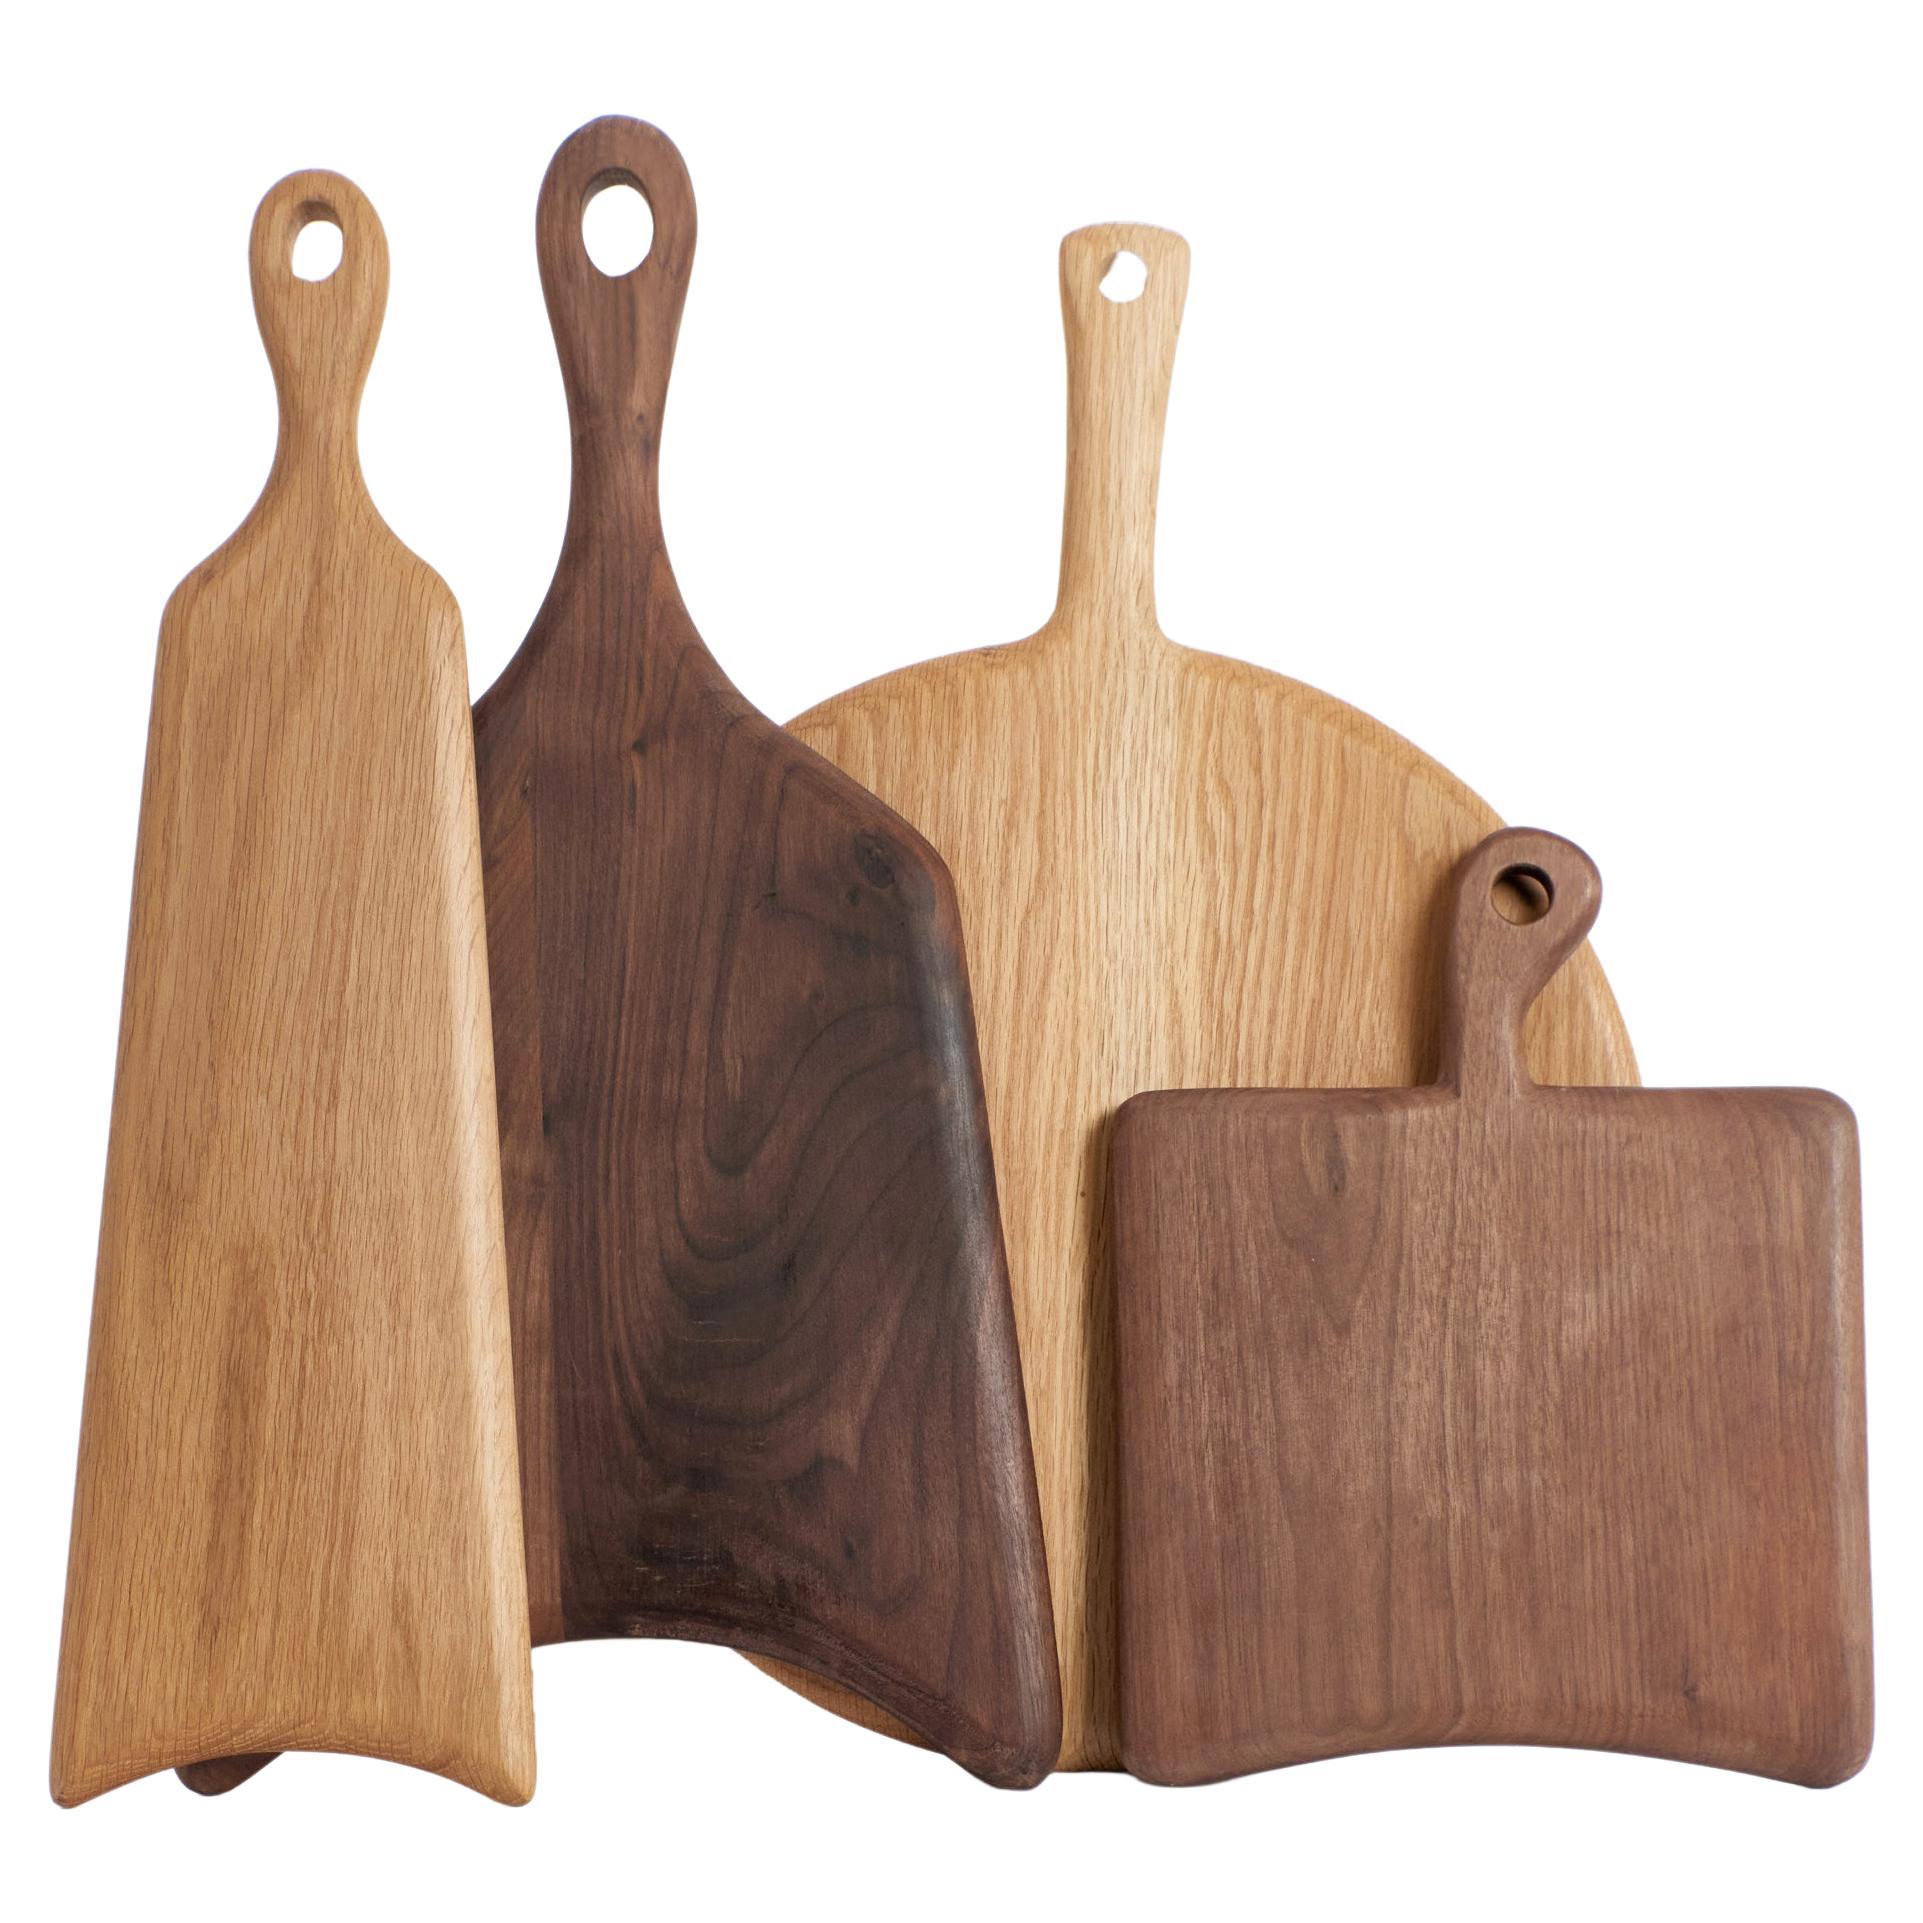 Set of Wooden Decorative Boards